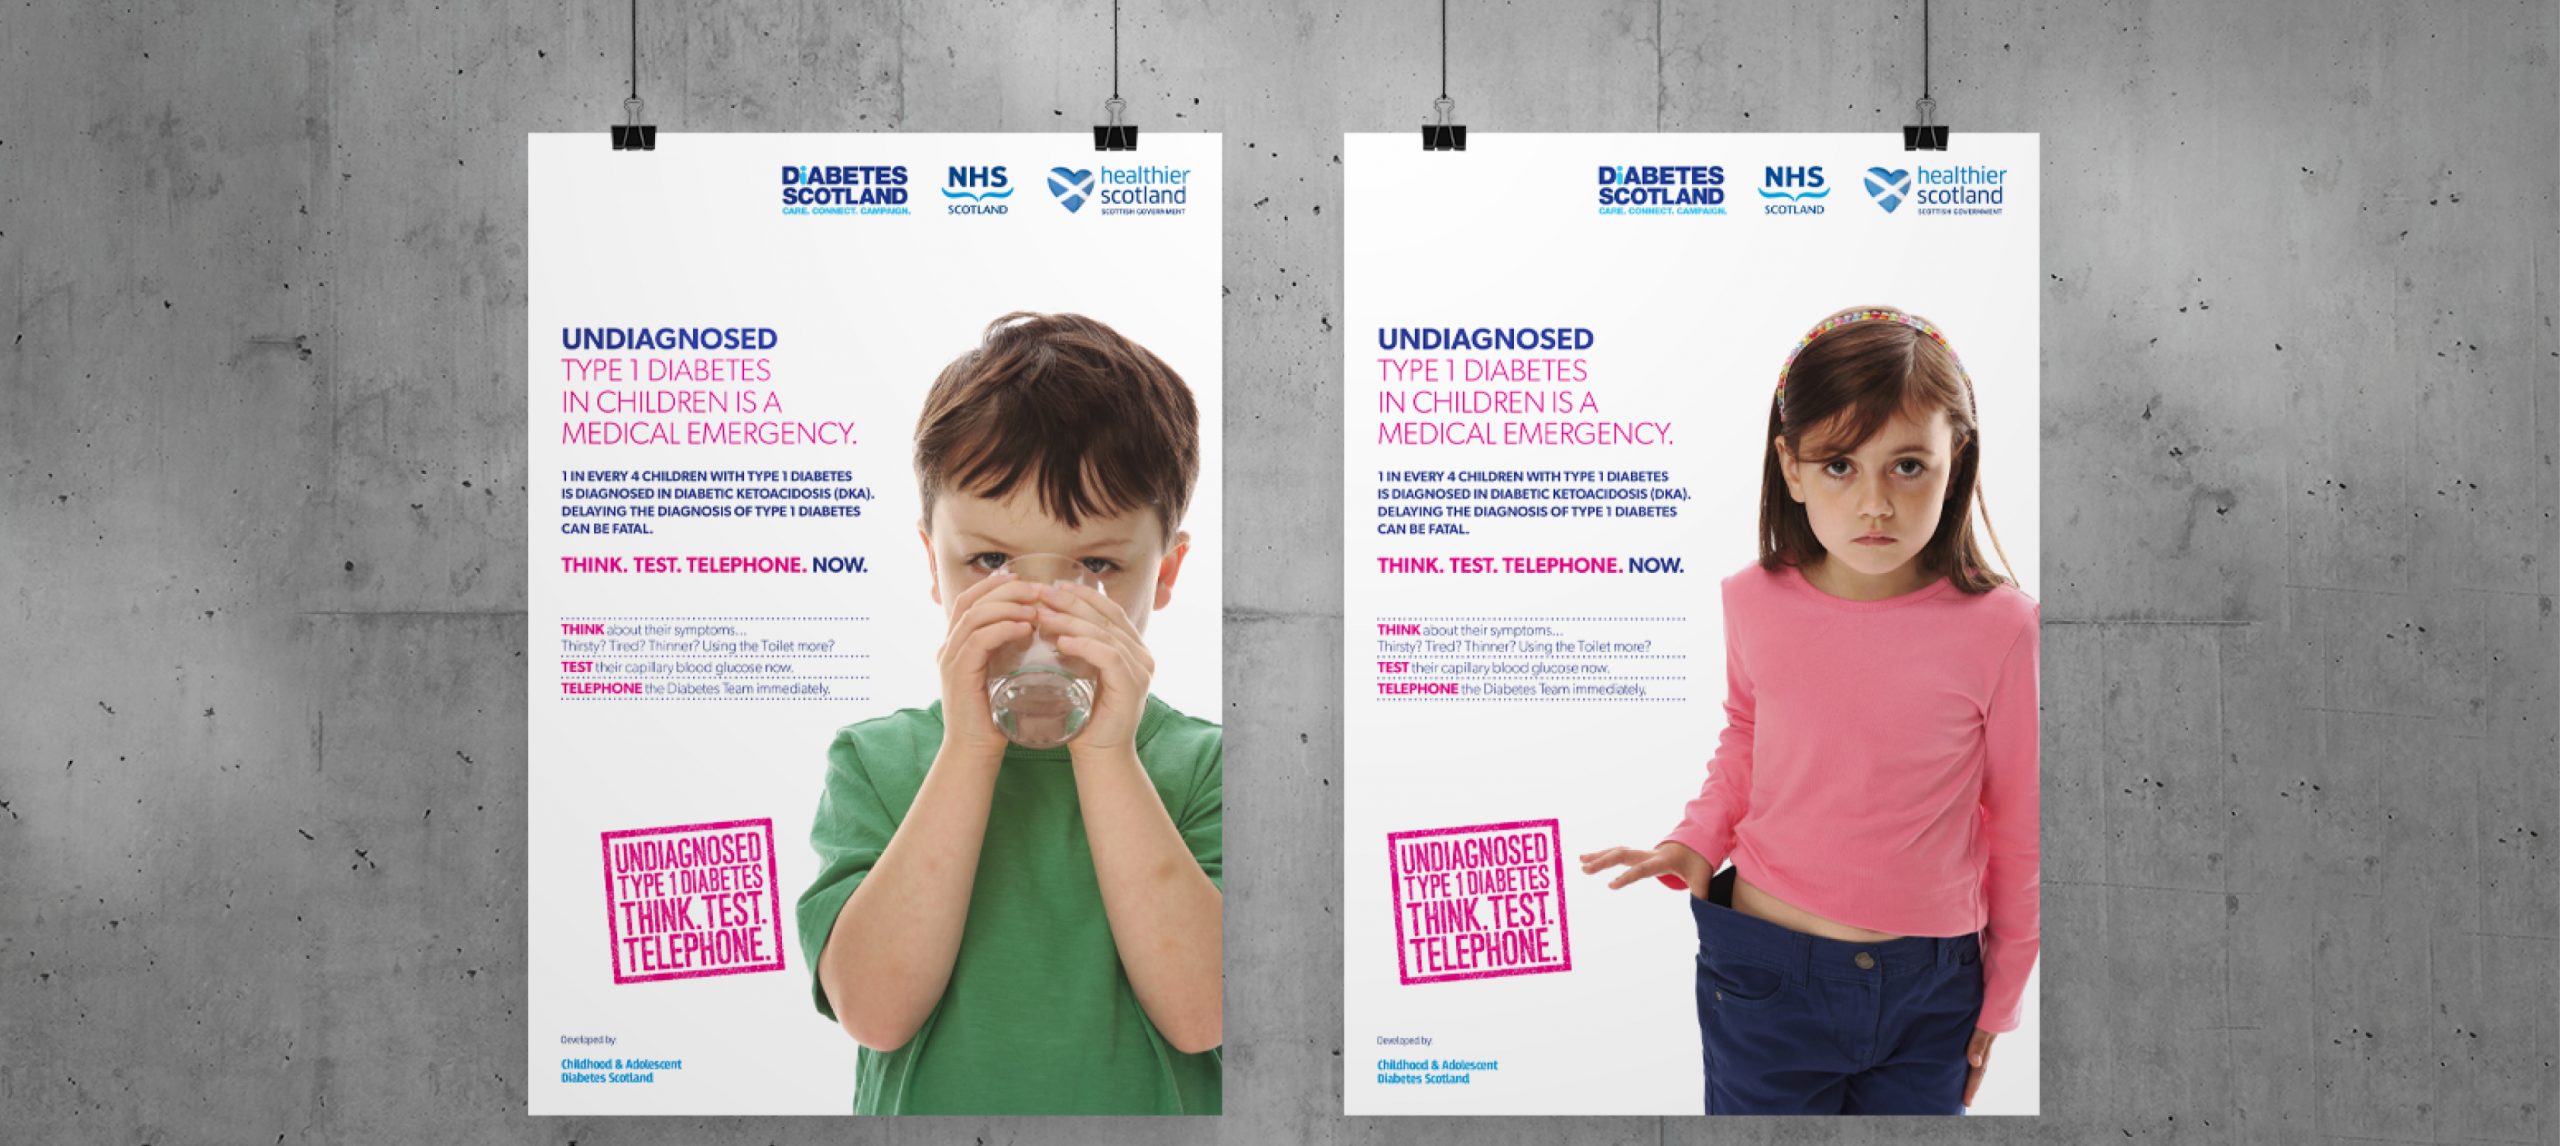 Large scale artwork for NHS Scotland's Diabetic ketoacidosis awareness campaign.